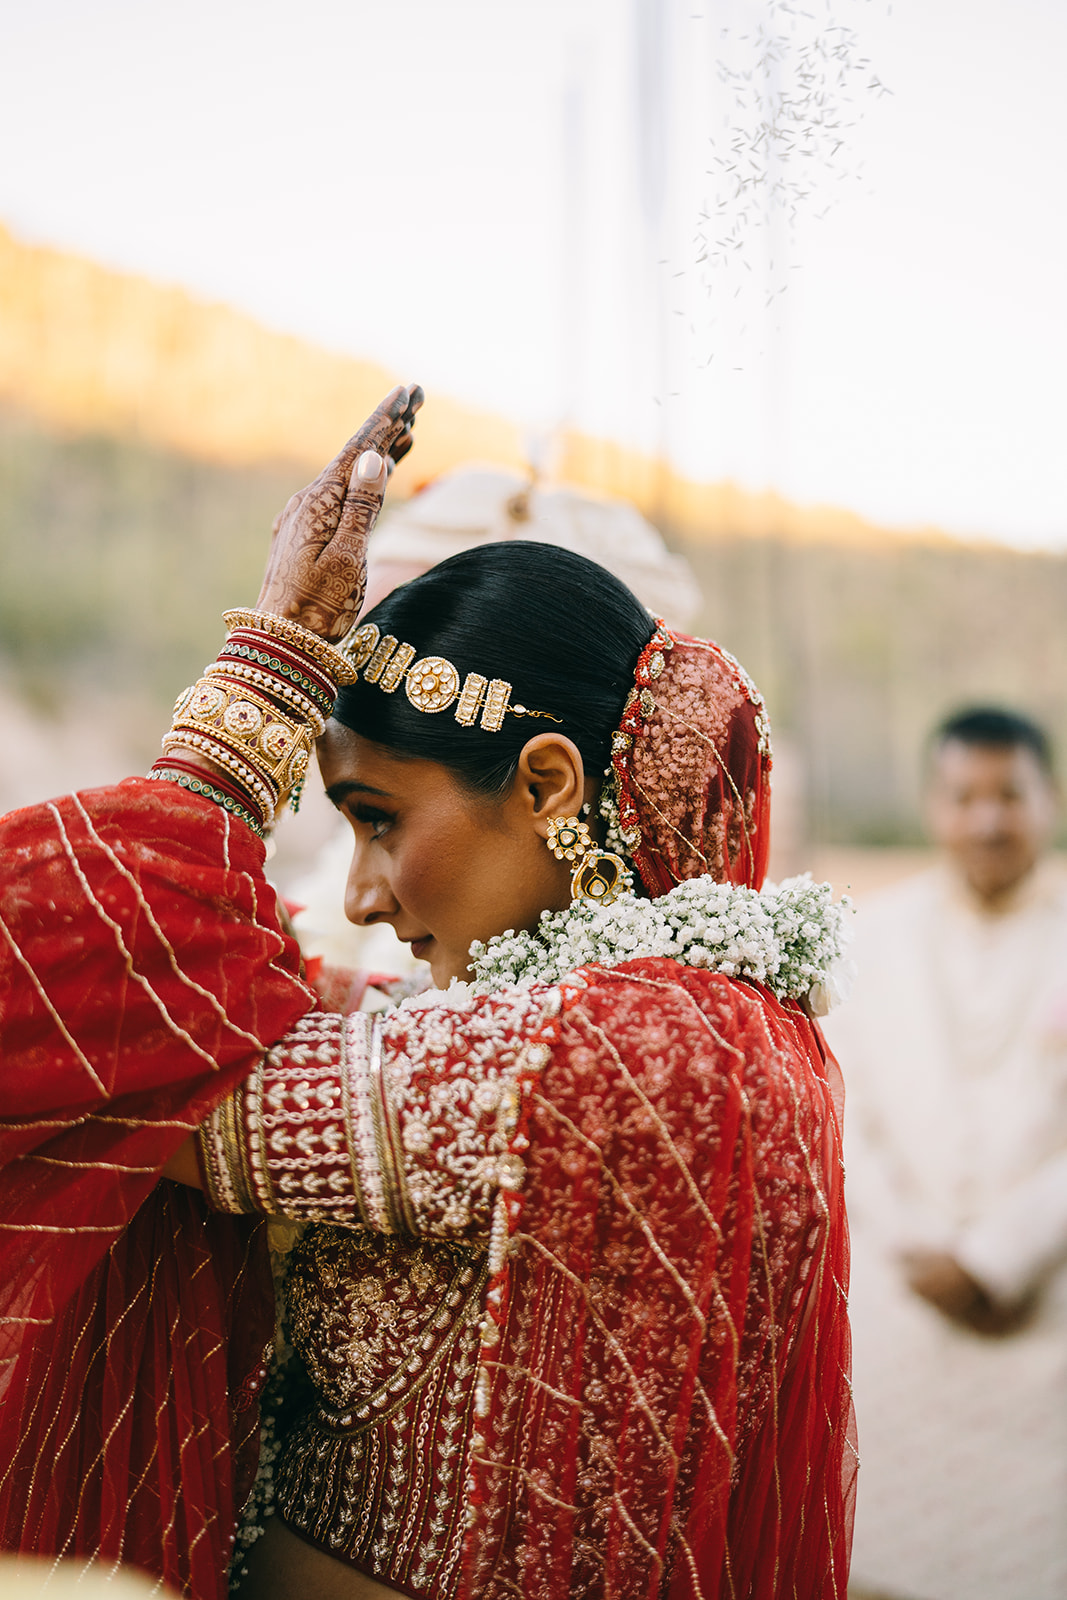 Side profile of indian Bride putting her wrist to her forehead. She has henna and bangles on her arm